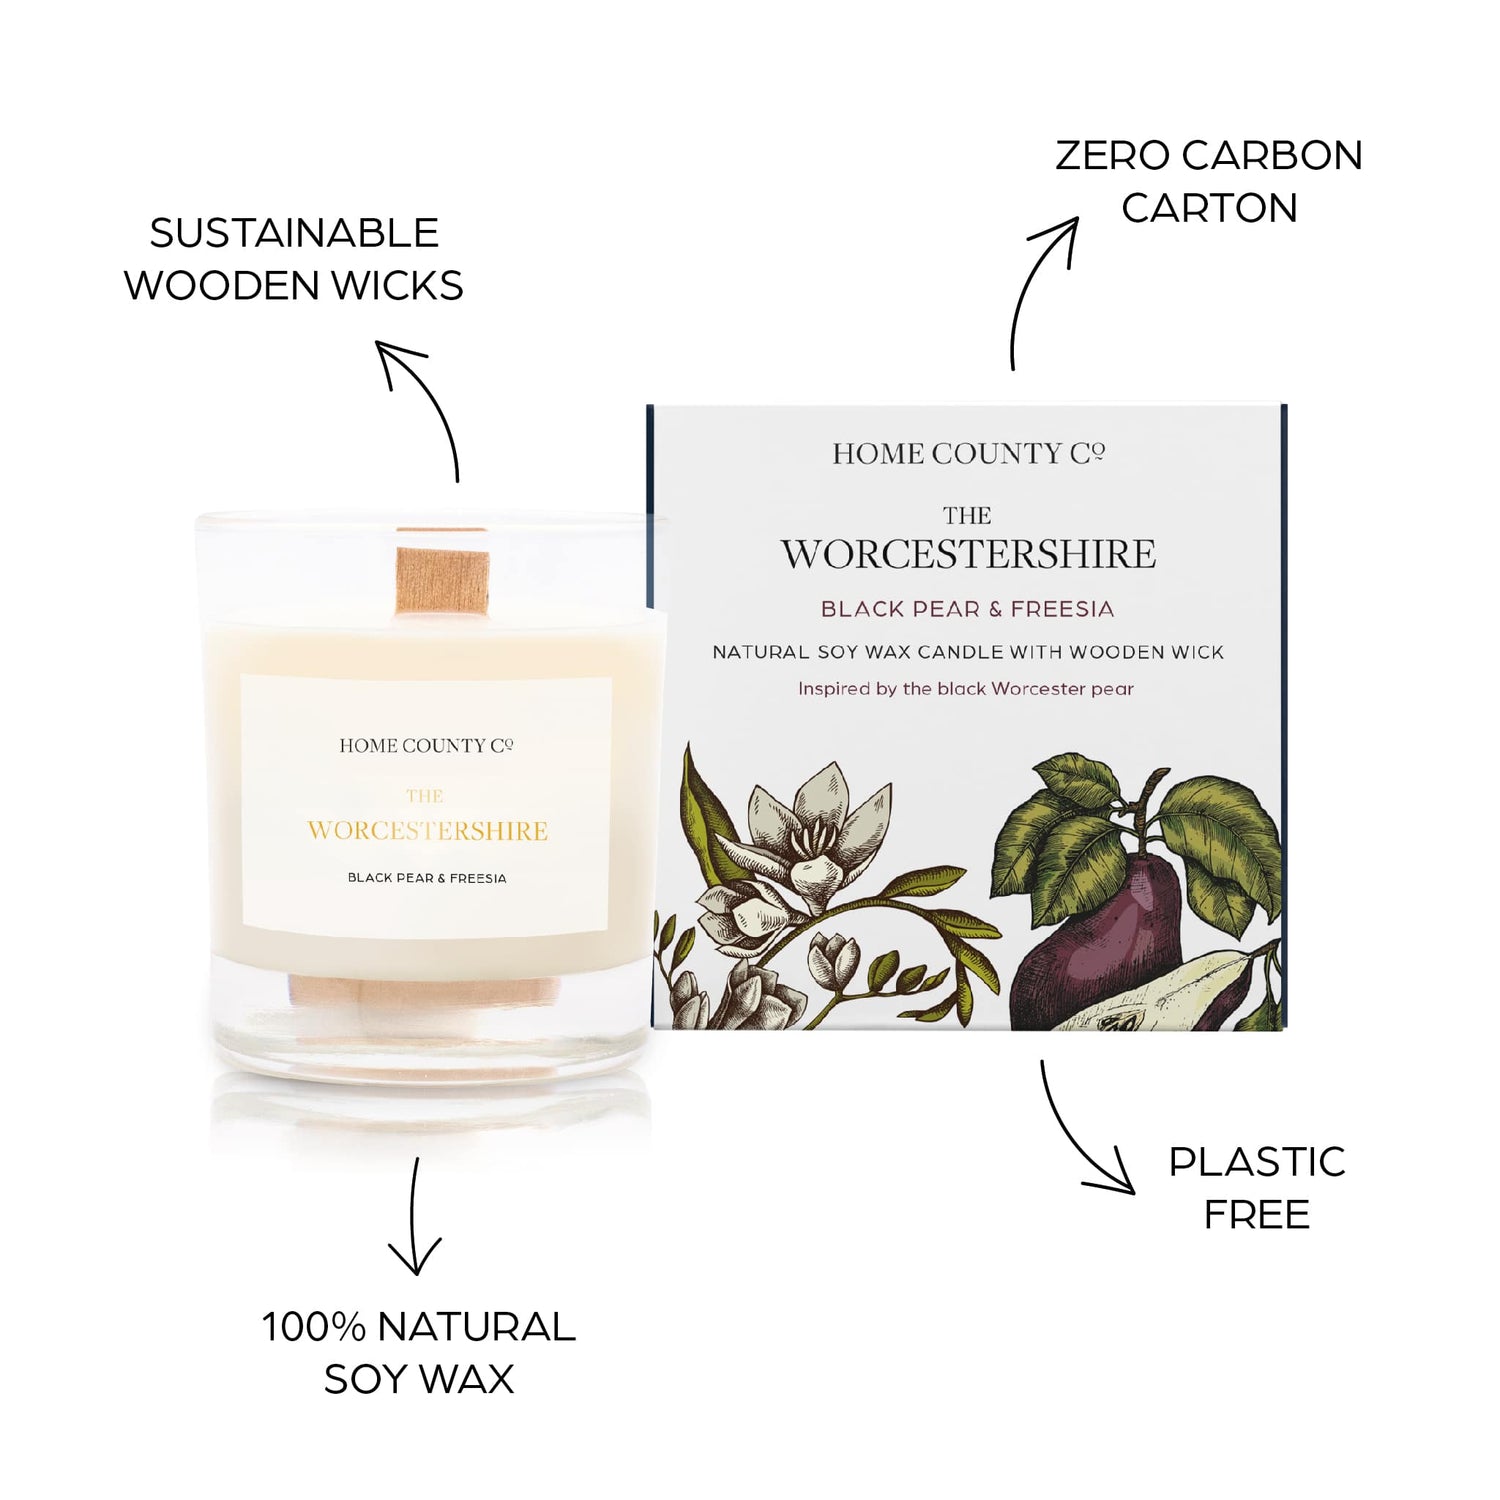 Sustainable candle credentials are shown around the pear scented candle image - sustainable wooden wicks, zero carbon carton, 100% natural soy wax, plastic free